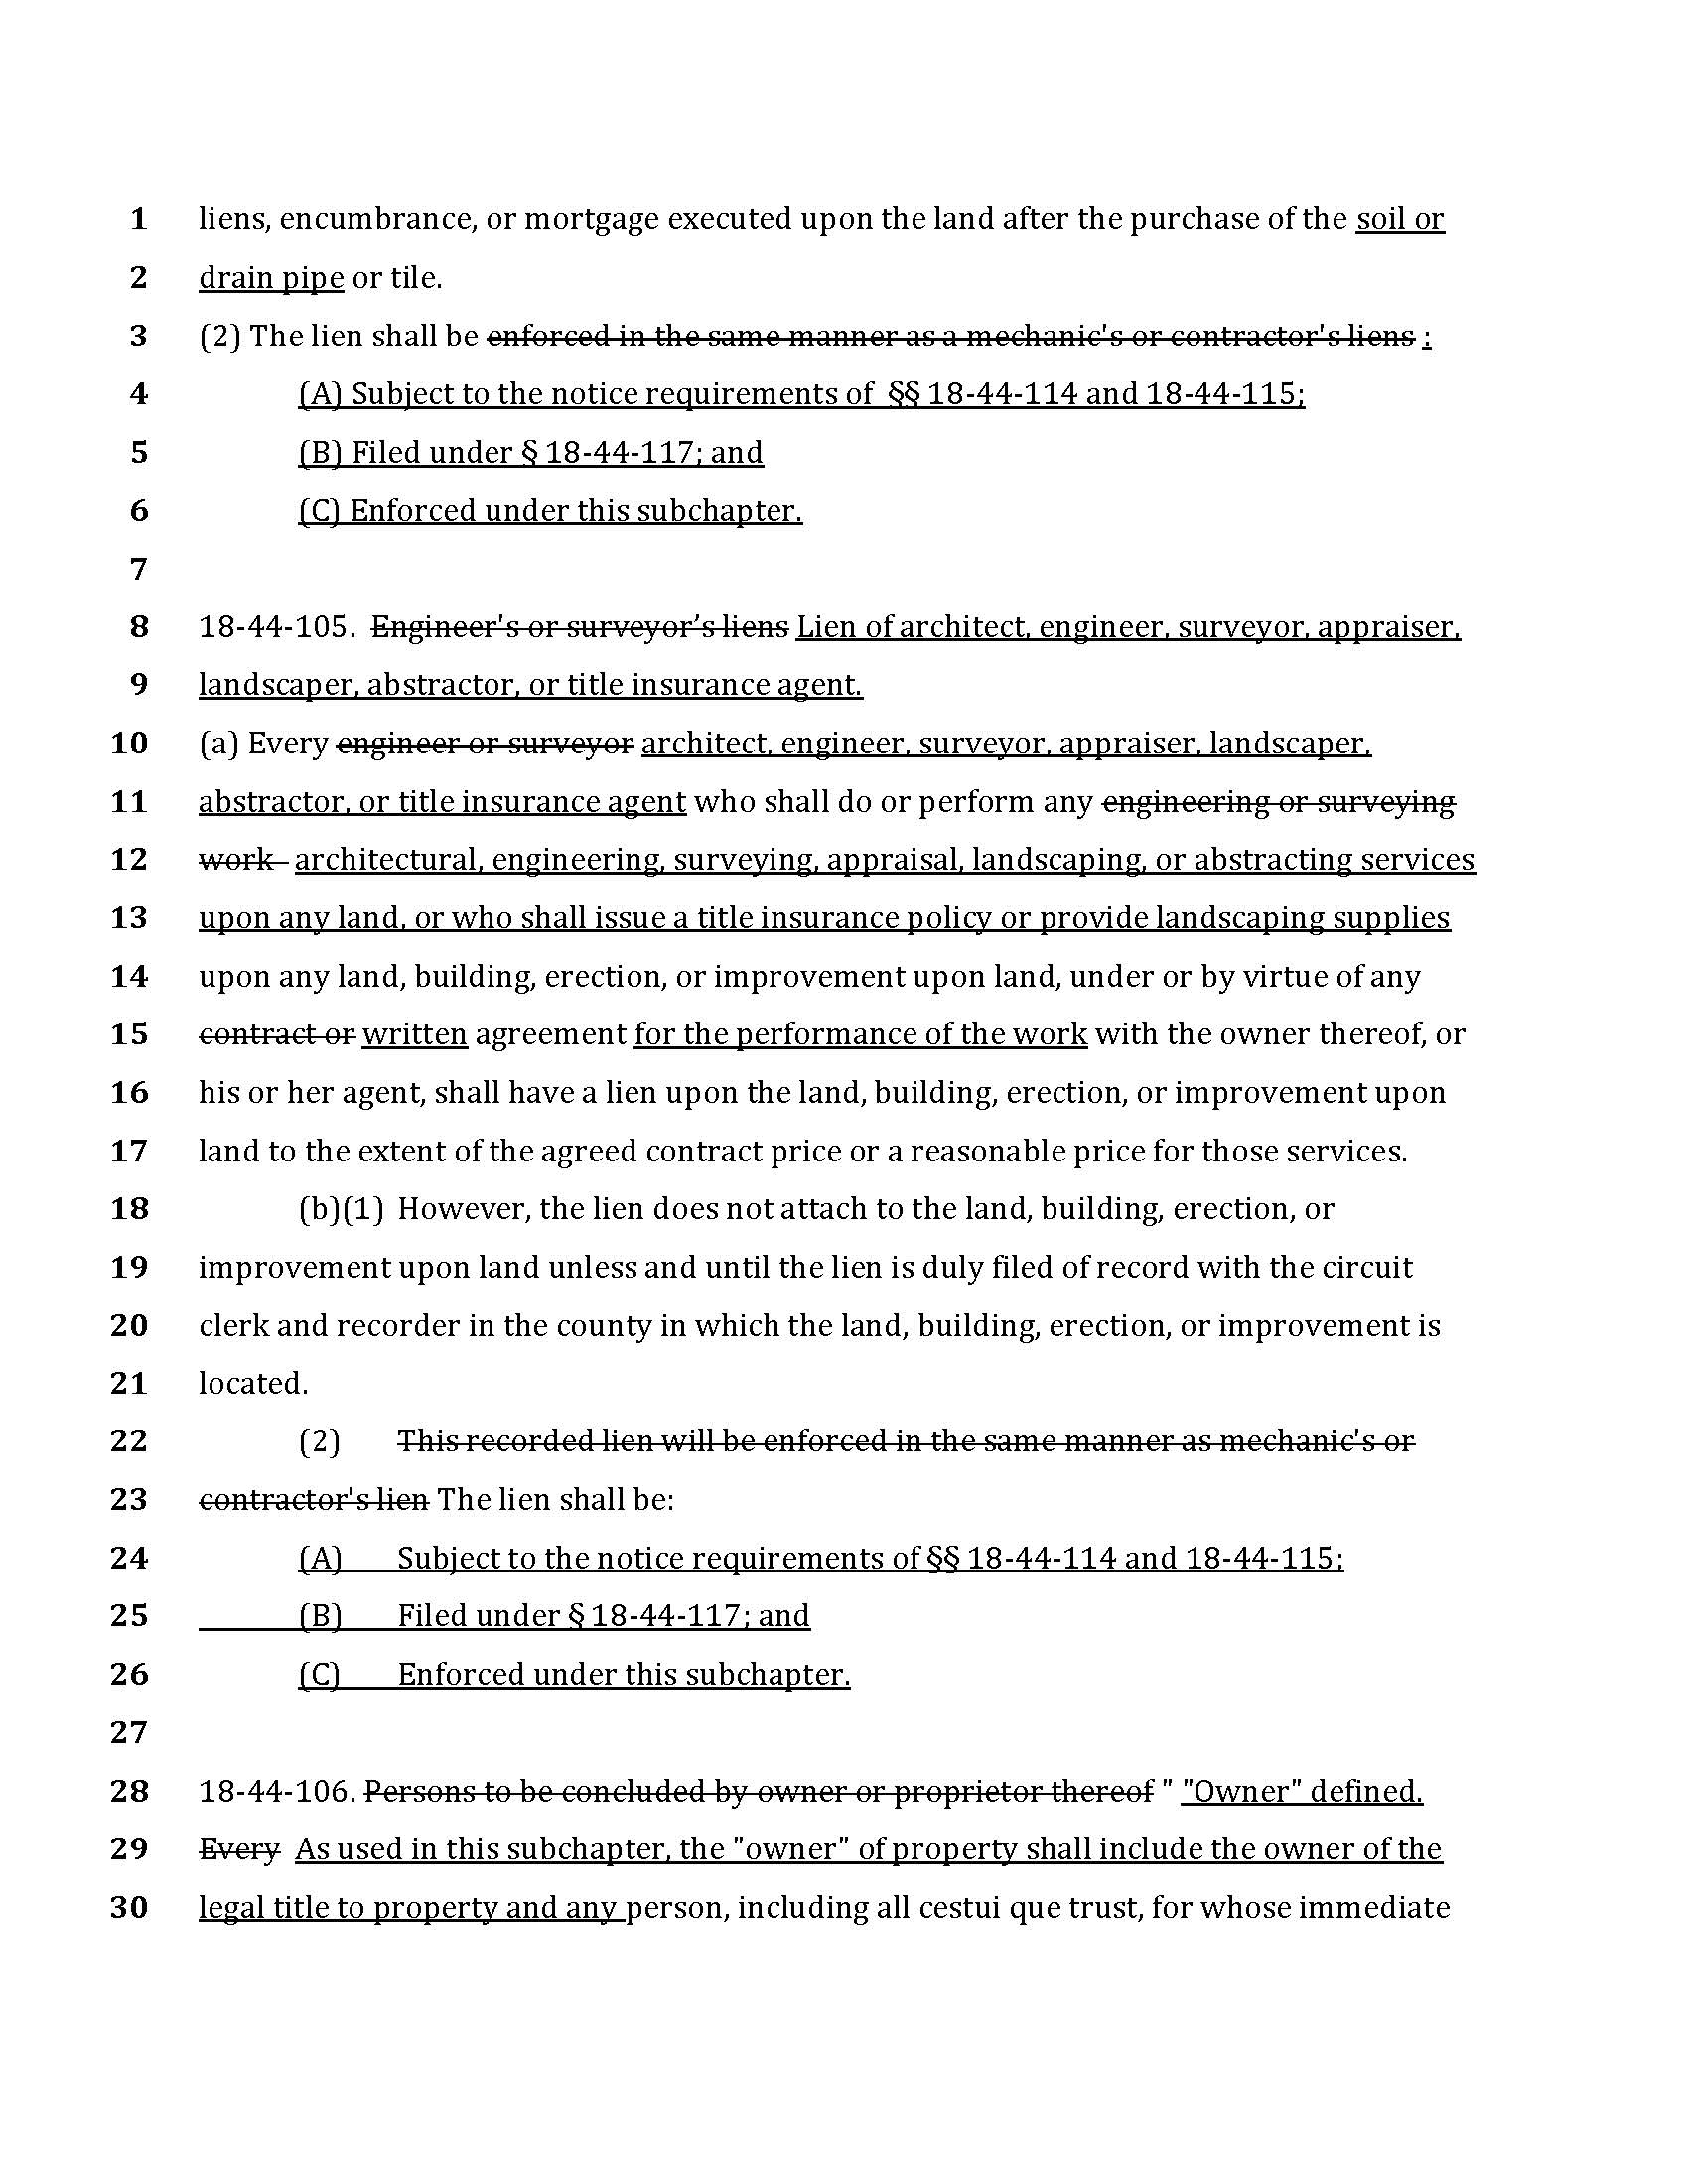 final-bill-lien-law-revisions_Page_02.jpg